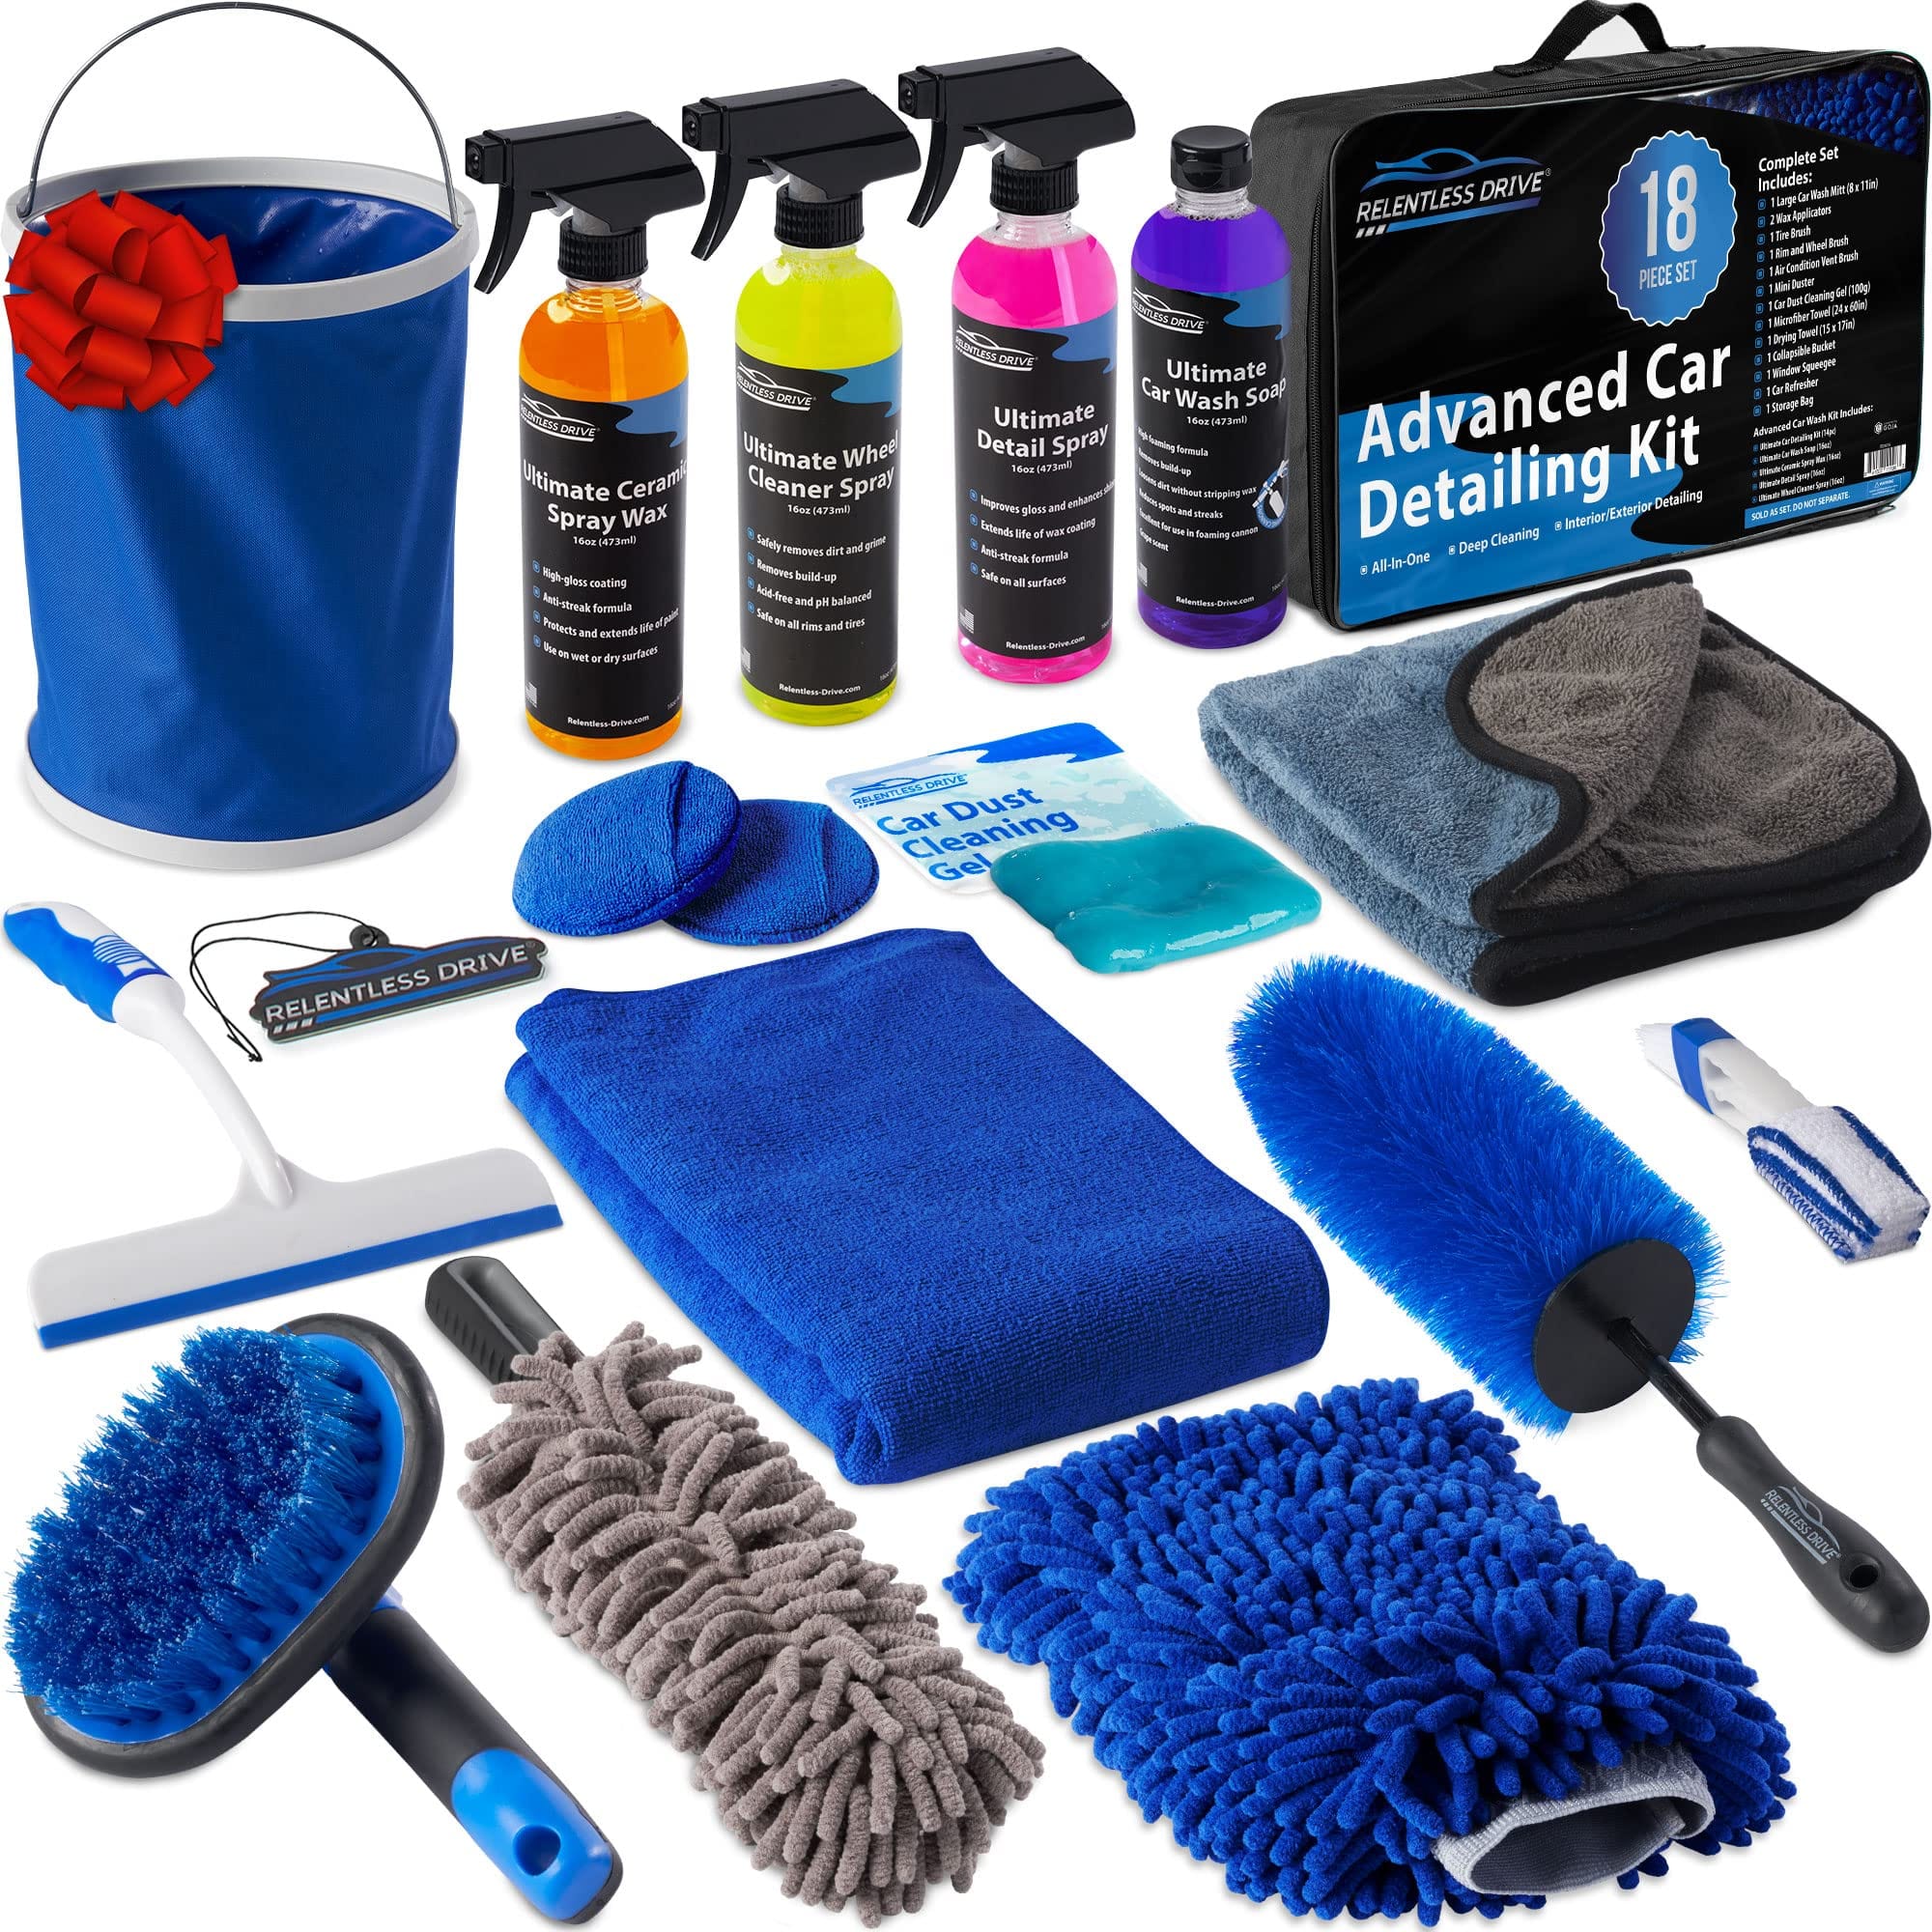  Relentless Drive Car Upholstery Cleaner Kit - Car Seat Cleaner  & Car Carpet Cleaner - Works Great on Stains, Keep Car Interior Smelling  Fresh - Car Interior Cleaner : Automotive